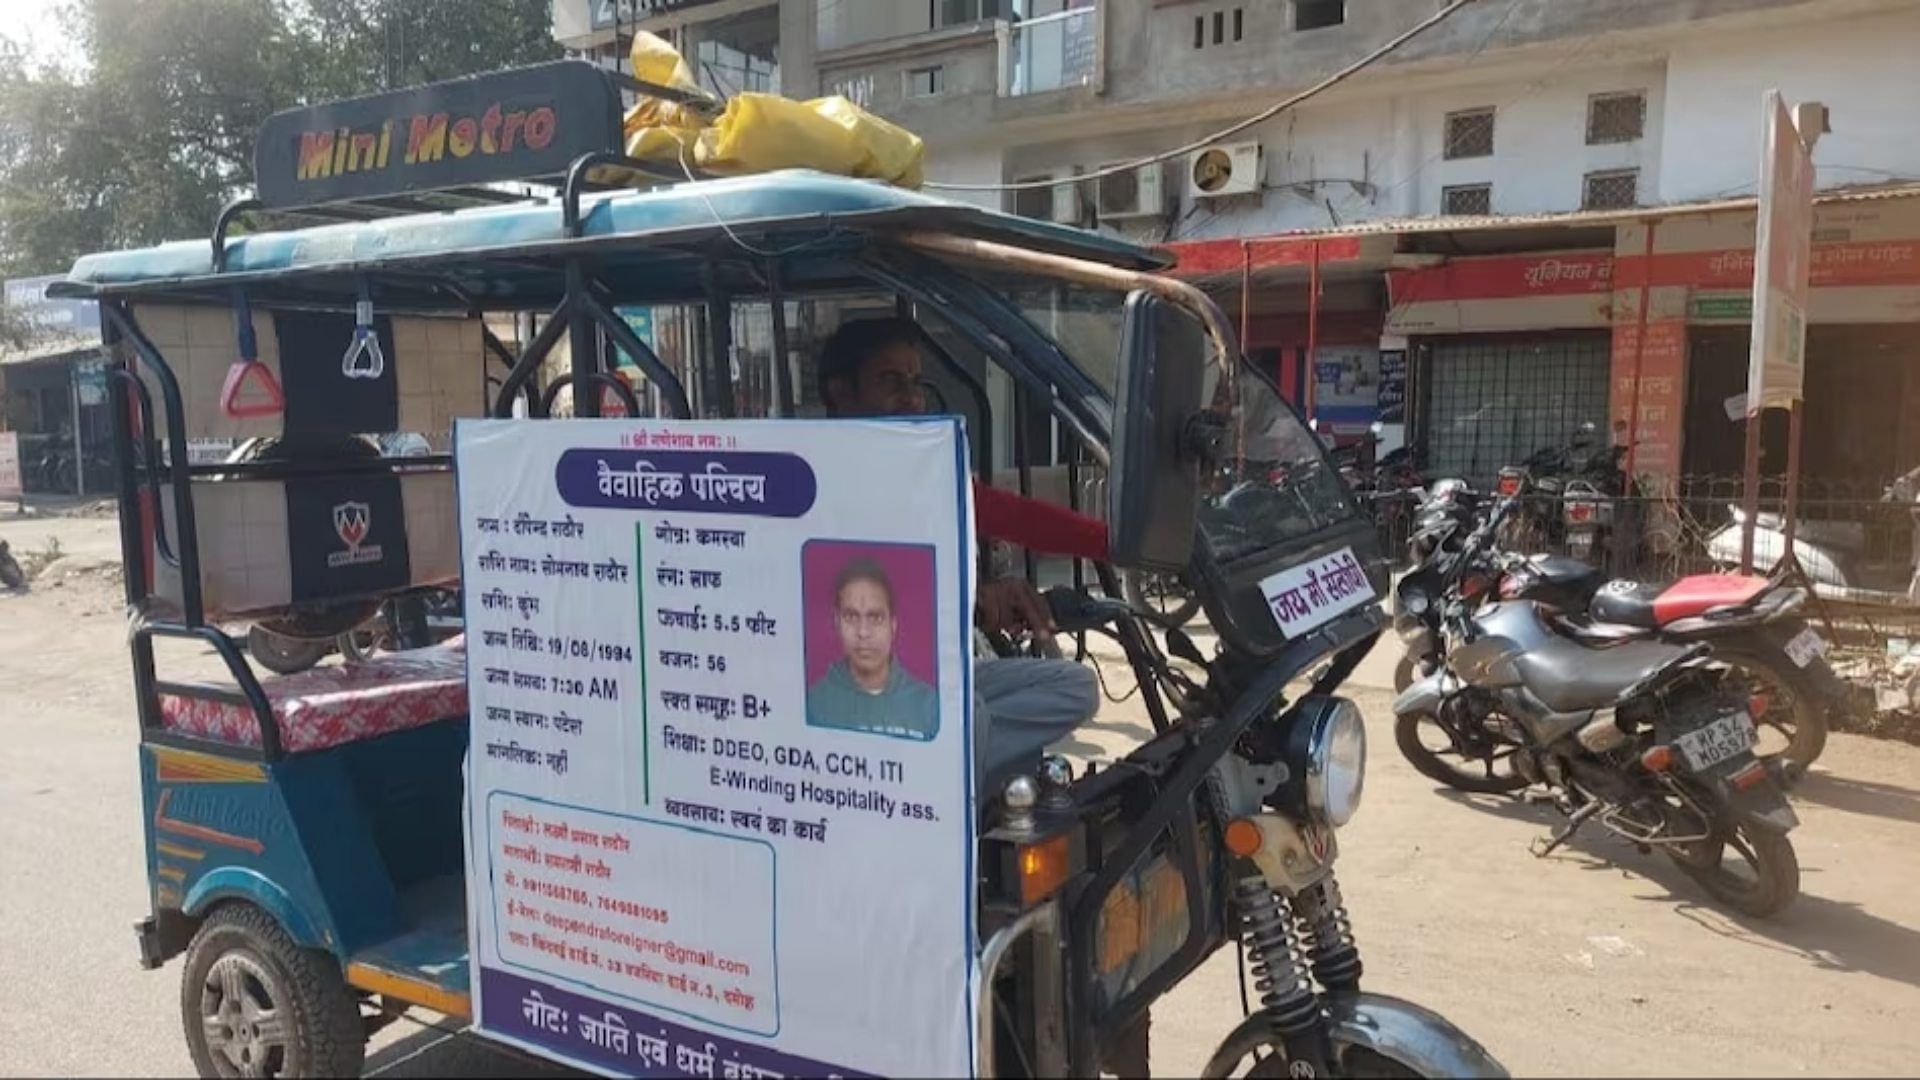 rickshaw driver searching for girl to marriage by putting up hoardings in damoh madhya pradesh